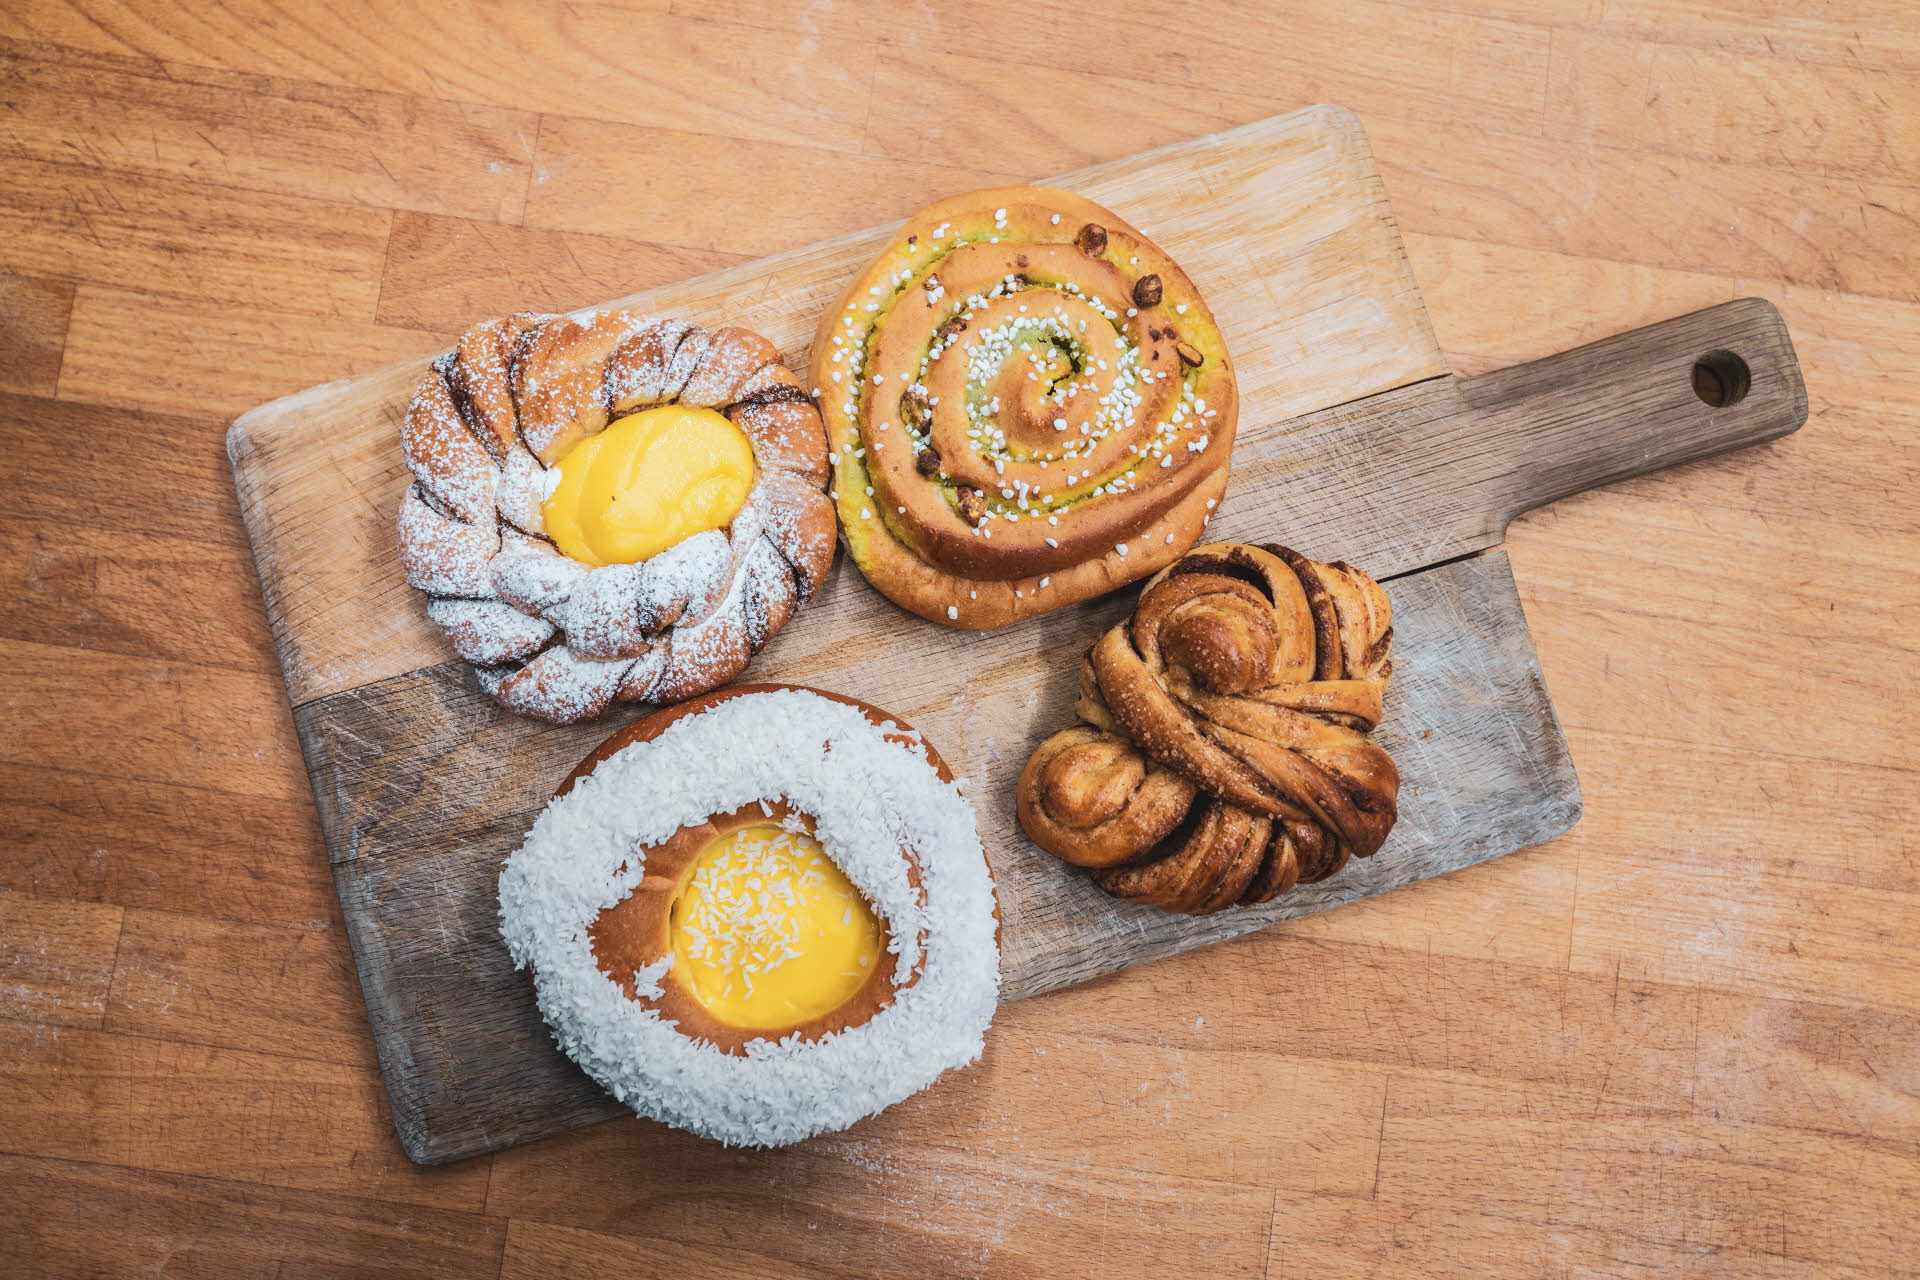 Breadrolls with egg in middle and cinnamon buns on wood plank